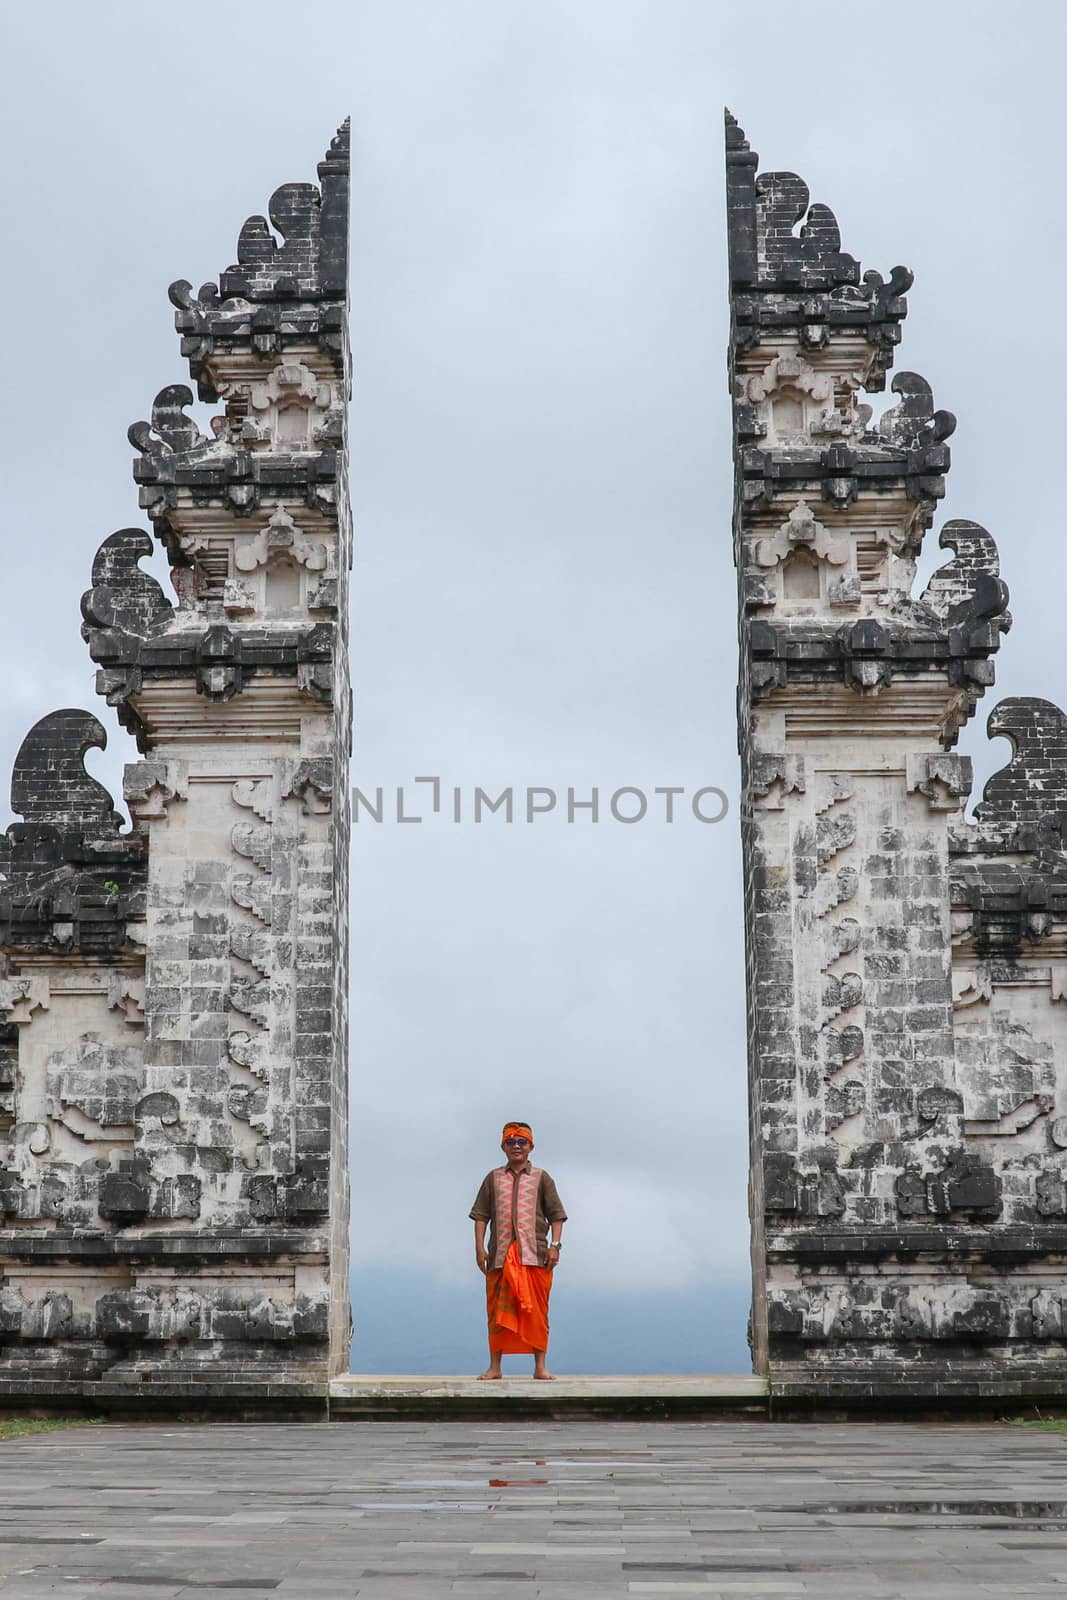 A man in traditional clothes passes through the gate looking back. Ancient gate in Pure Lempuyan, Bali, Indonesia.